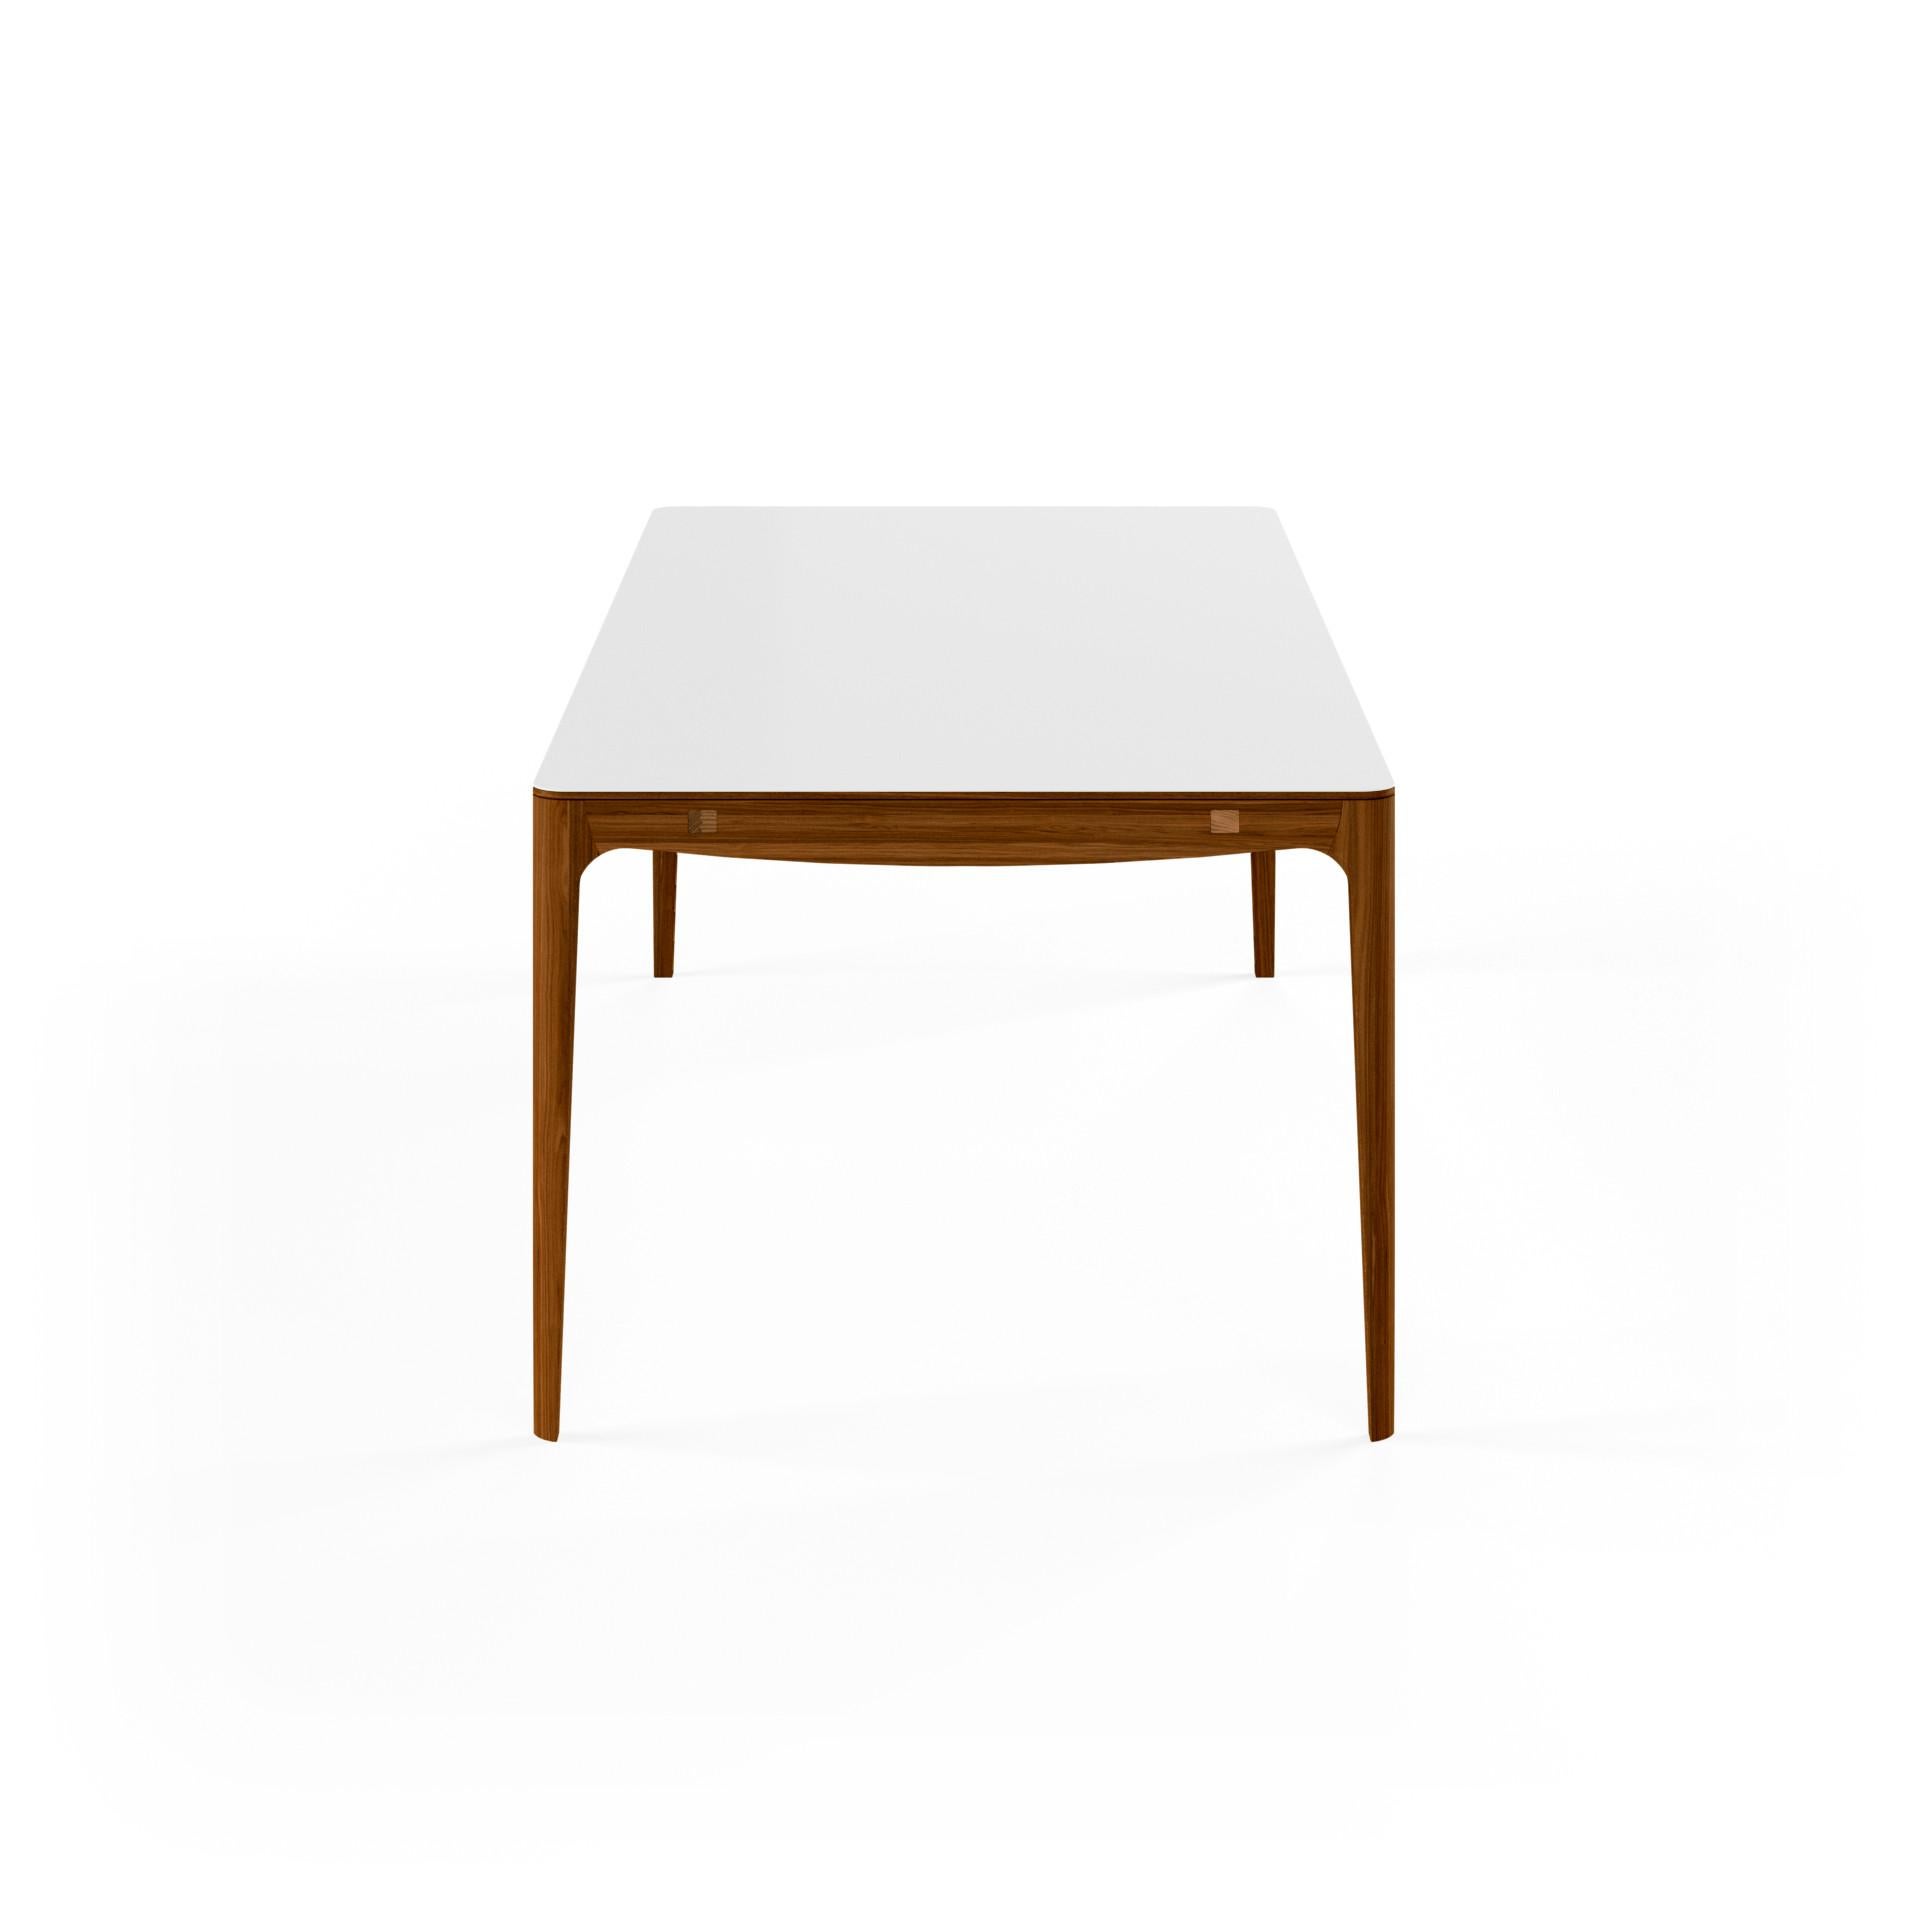 The Ro table series combines Classic cabinetmaker traditions with a clean expression that fits a modern setting.
In close collaboration with designer, Hans Sandgren Jakobsen, we have developed the table, GM 3700 Ro. Hans Sandgren has designed a